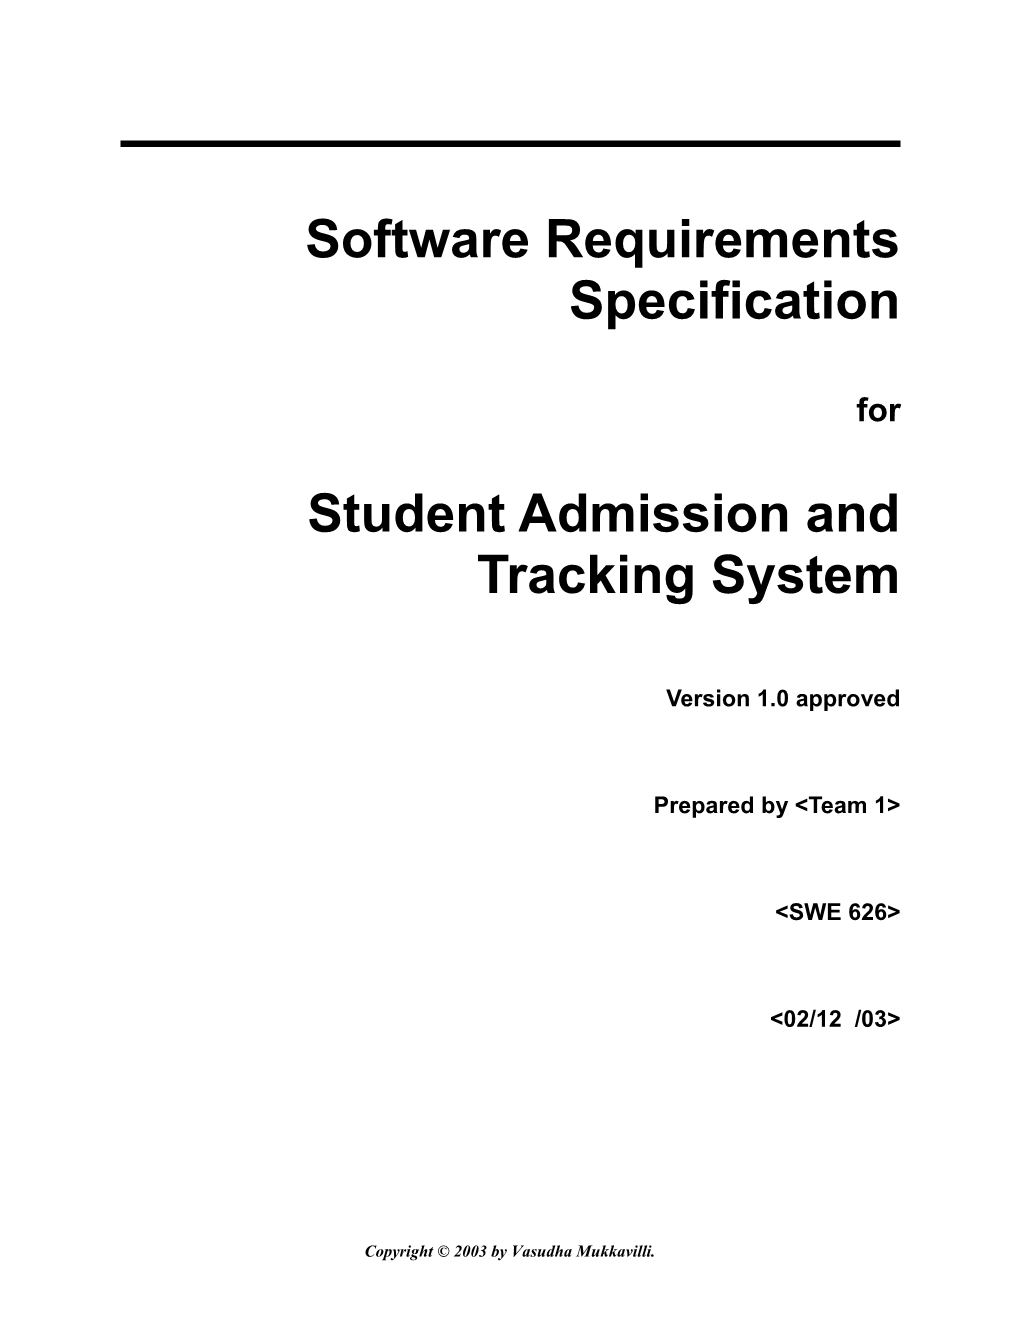 Software Requirements Specification Template s5